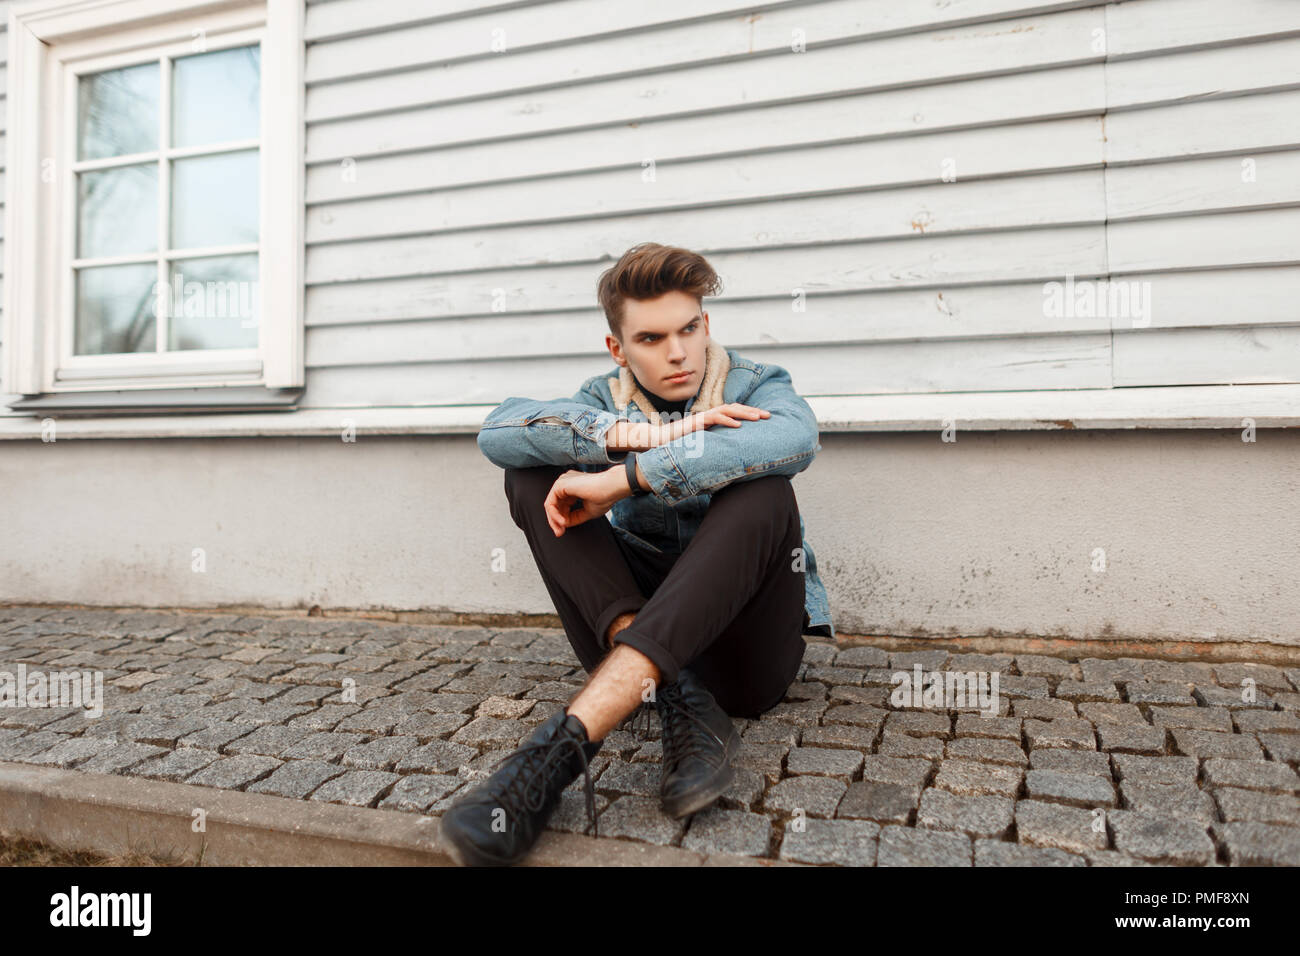 stylish fashionable young guy in a denim fashion jacket with black pants and shoes sitting near a wooden house Stock Photo